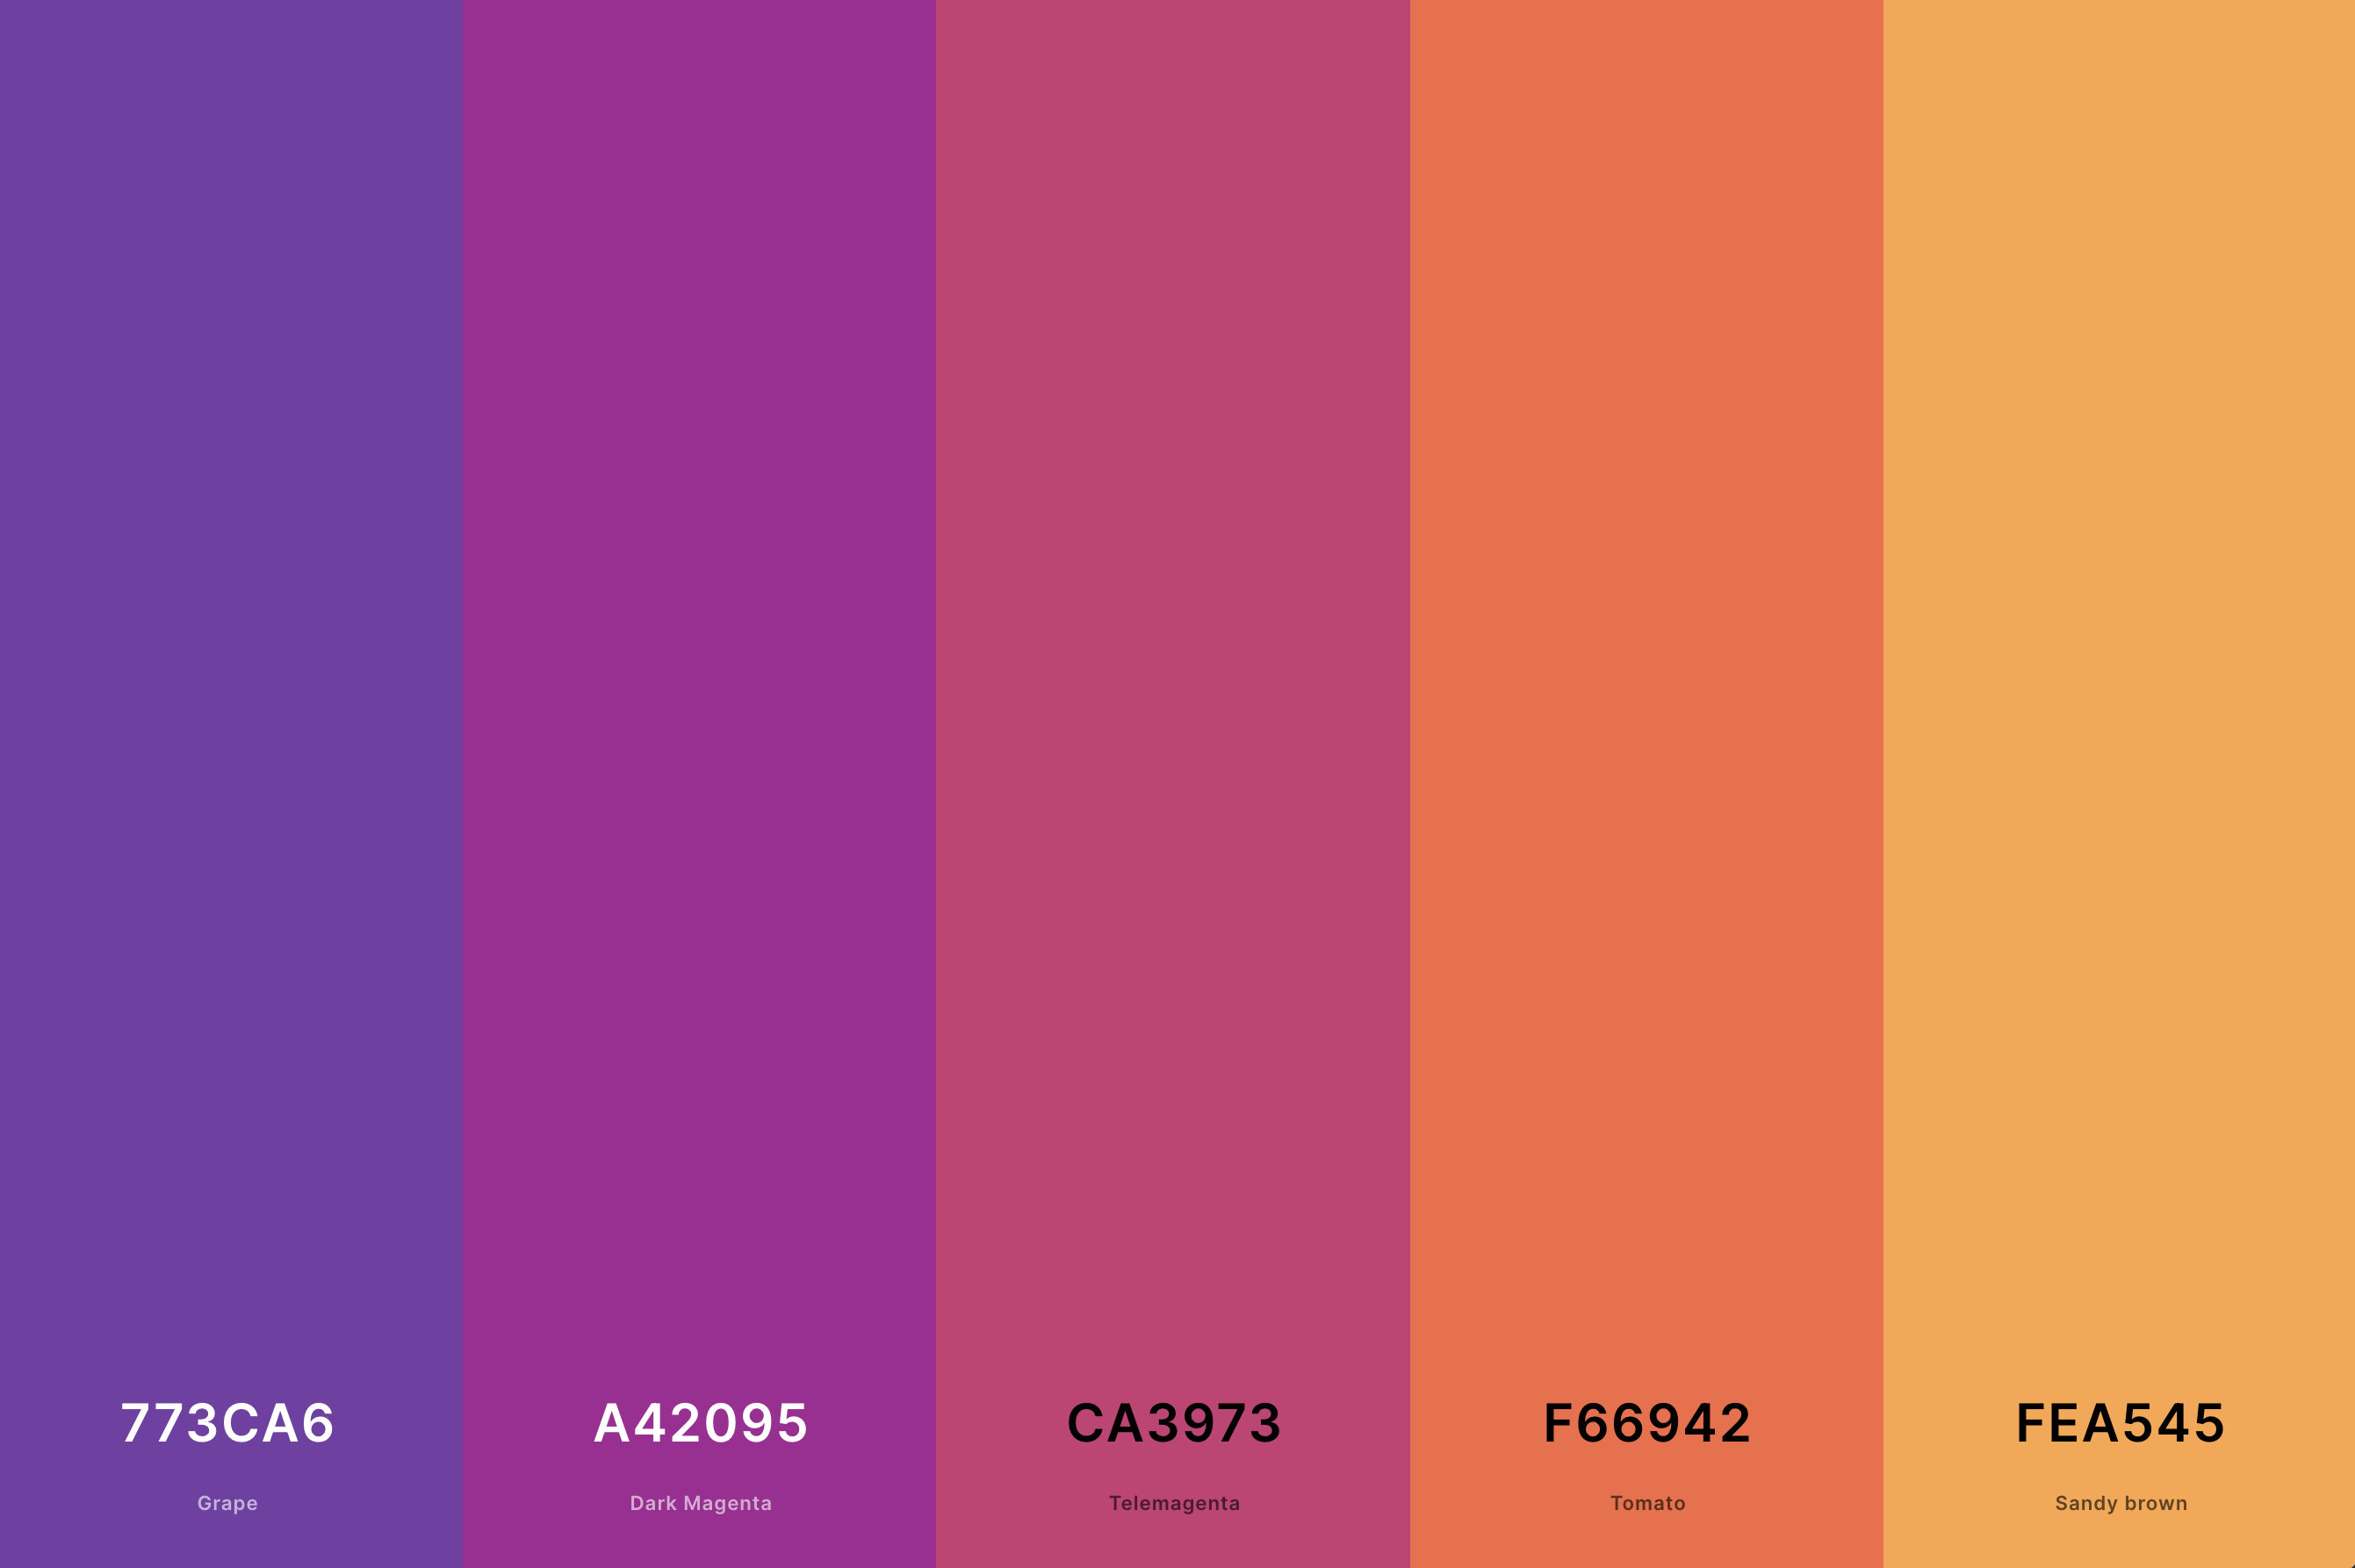 21. Purple Sunset Color Palette Color Palette with Grape (Hex #773CA6) + Dark Magenta (Hex #A42095) + Telemagenta (Hex #CA3973) + Tomato (Hex #F66942) + Sandy Brown (Hex #FEA545) Color Palette with Hex Codes